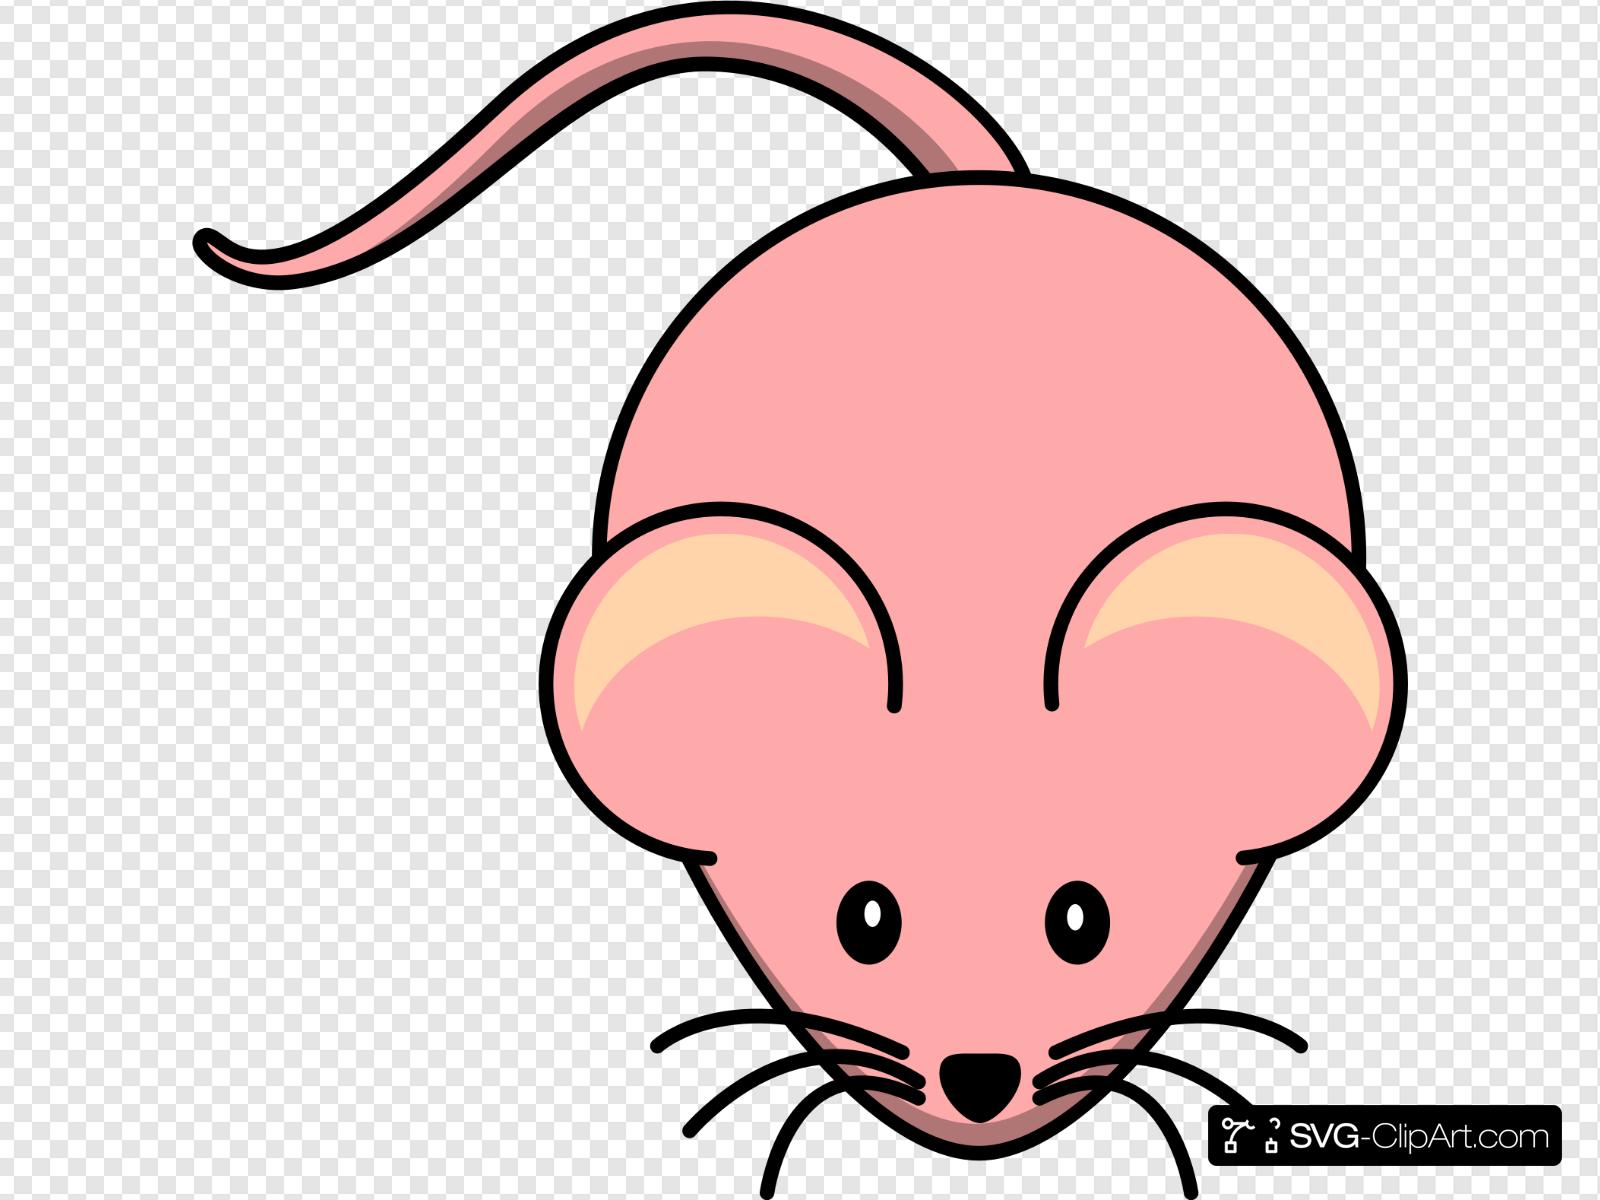 Pinky Mouse Clip art, Icon and SVG